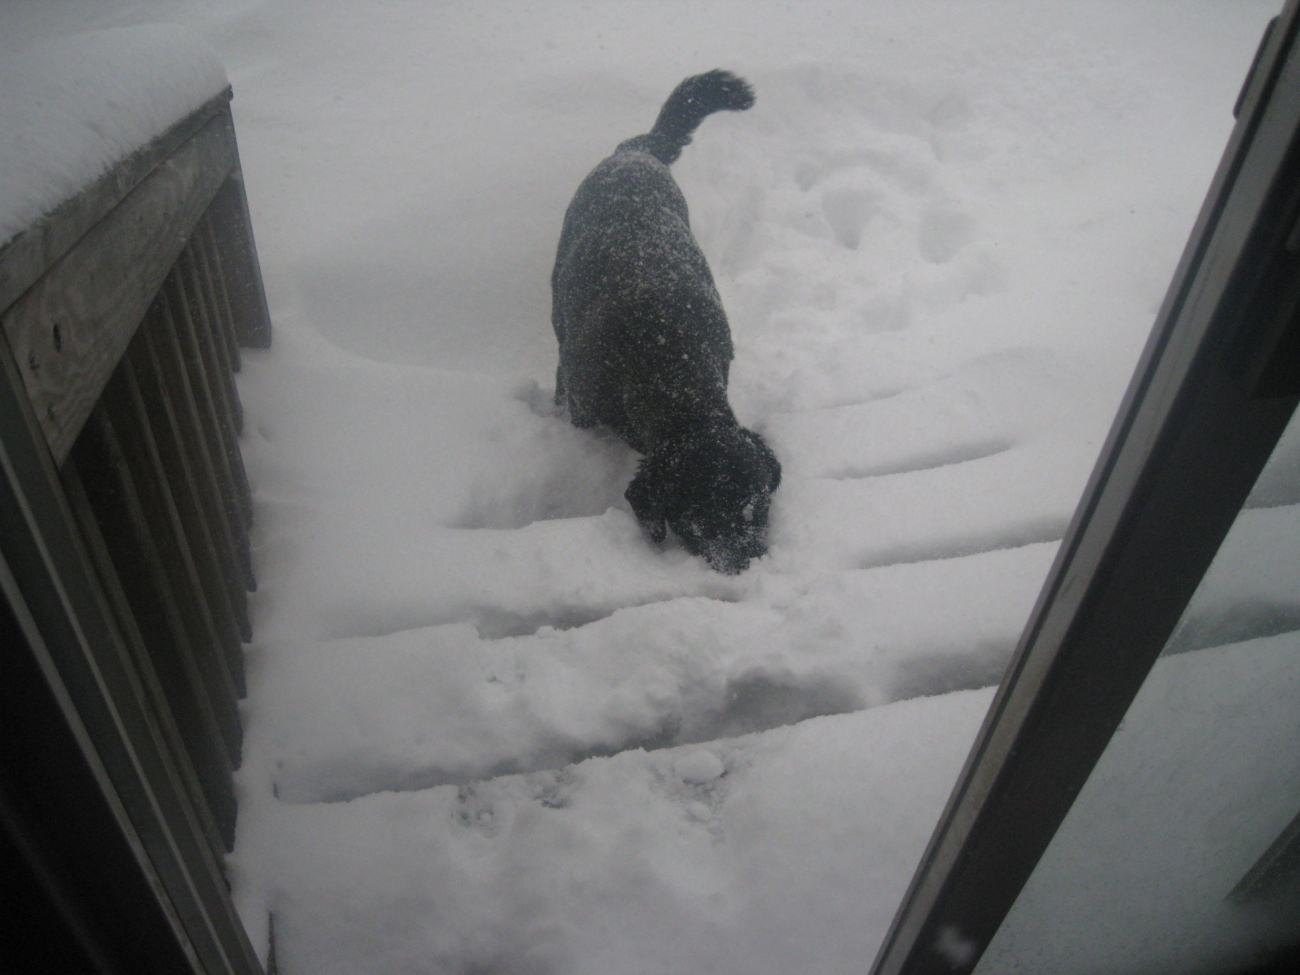 Dog making his way back up the steps to warmth inside during blizzard ofFebruary 9-10 2010